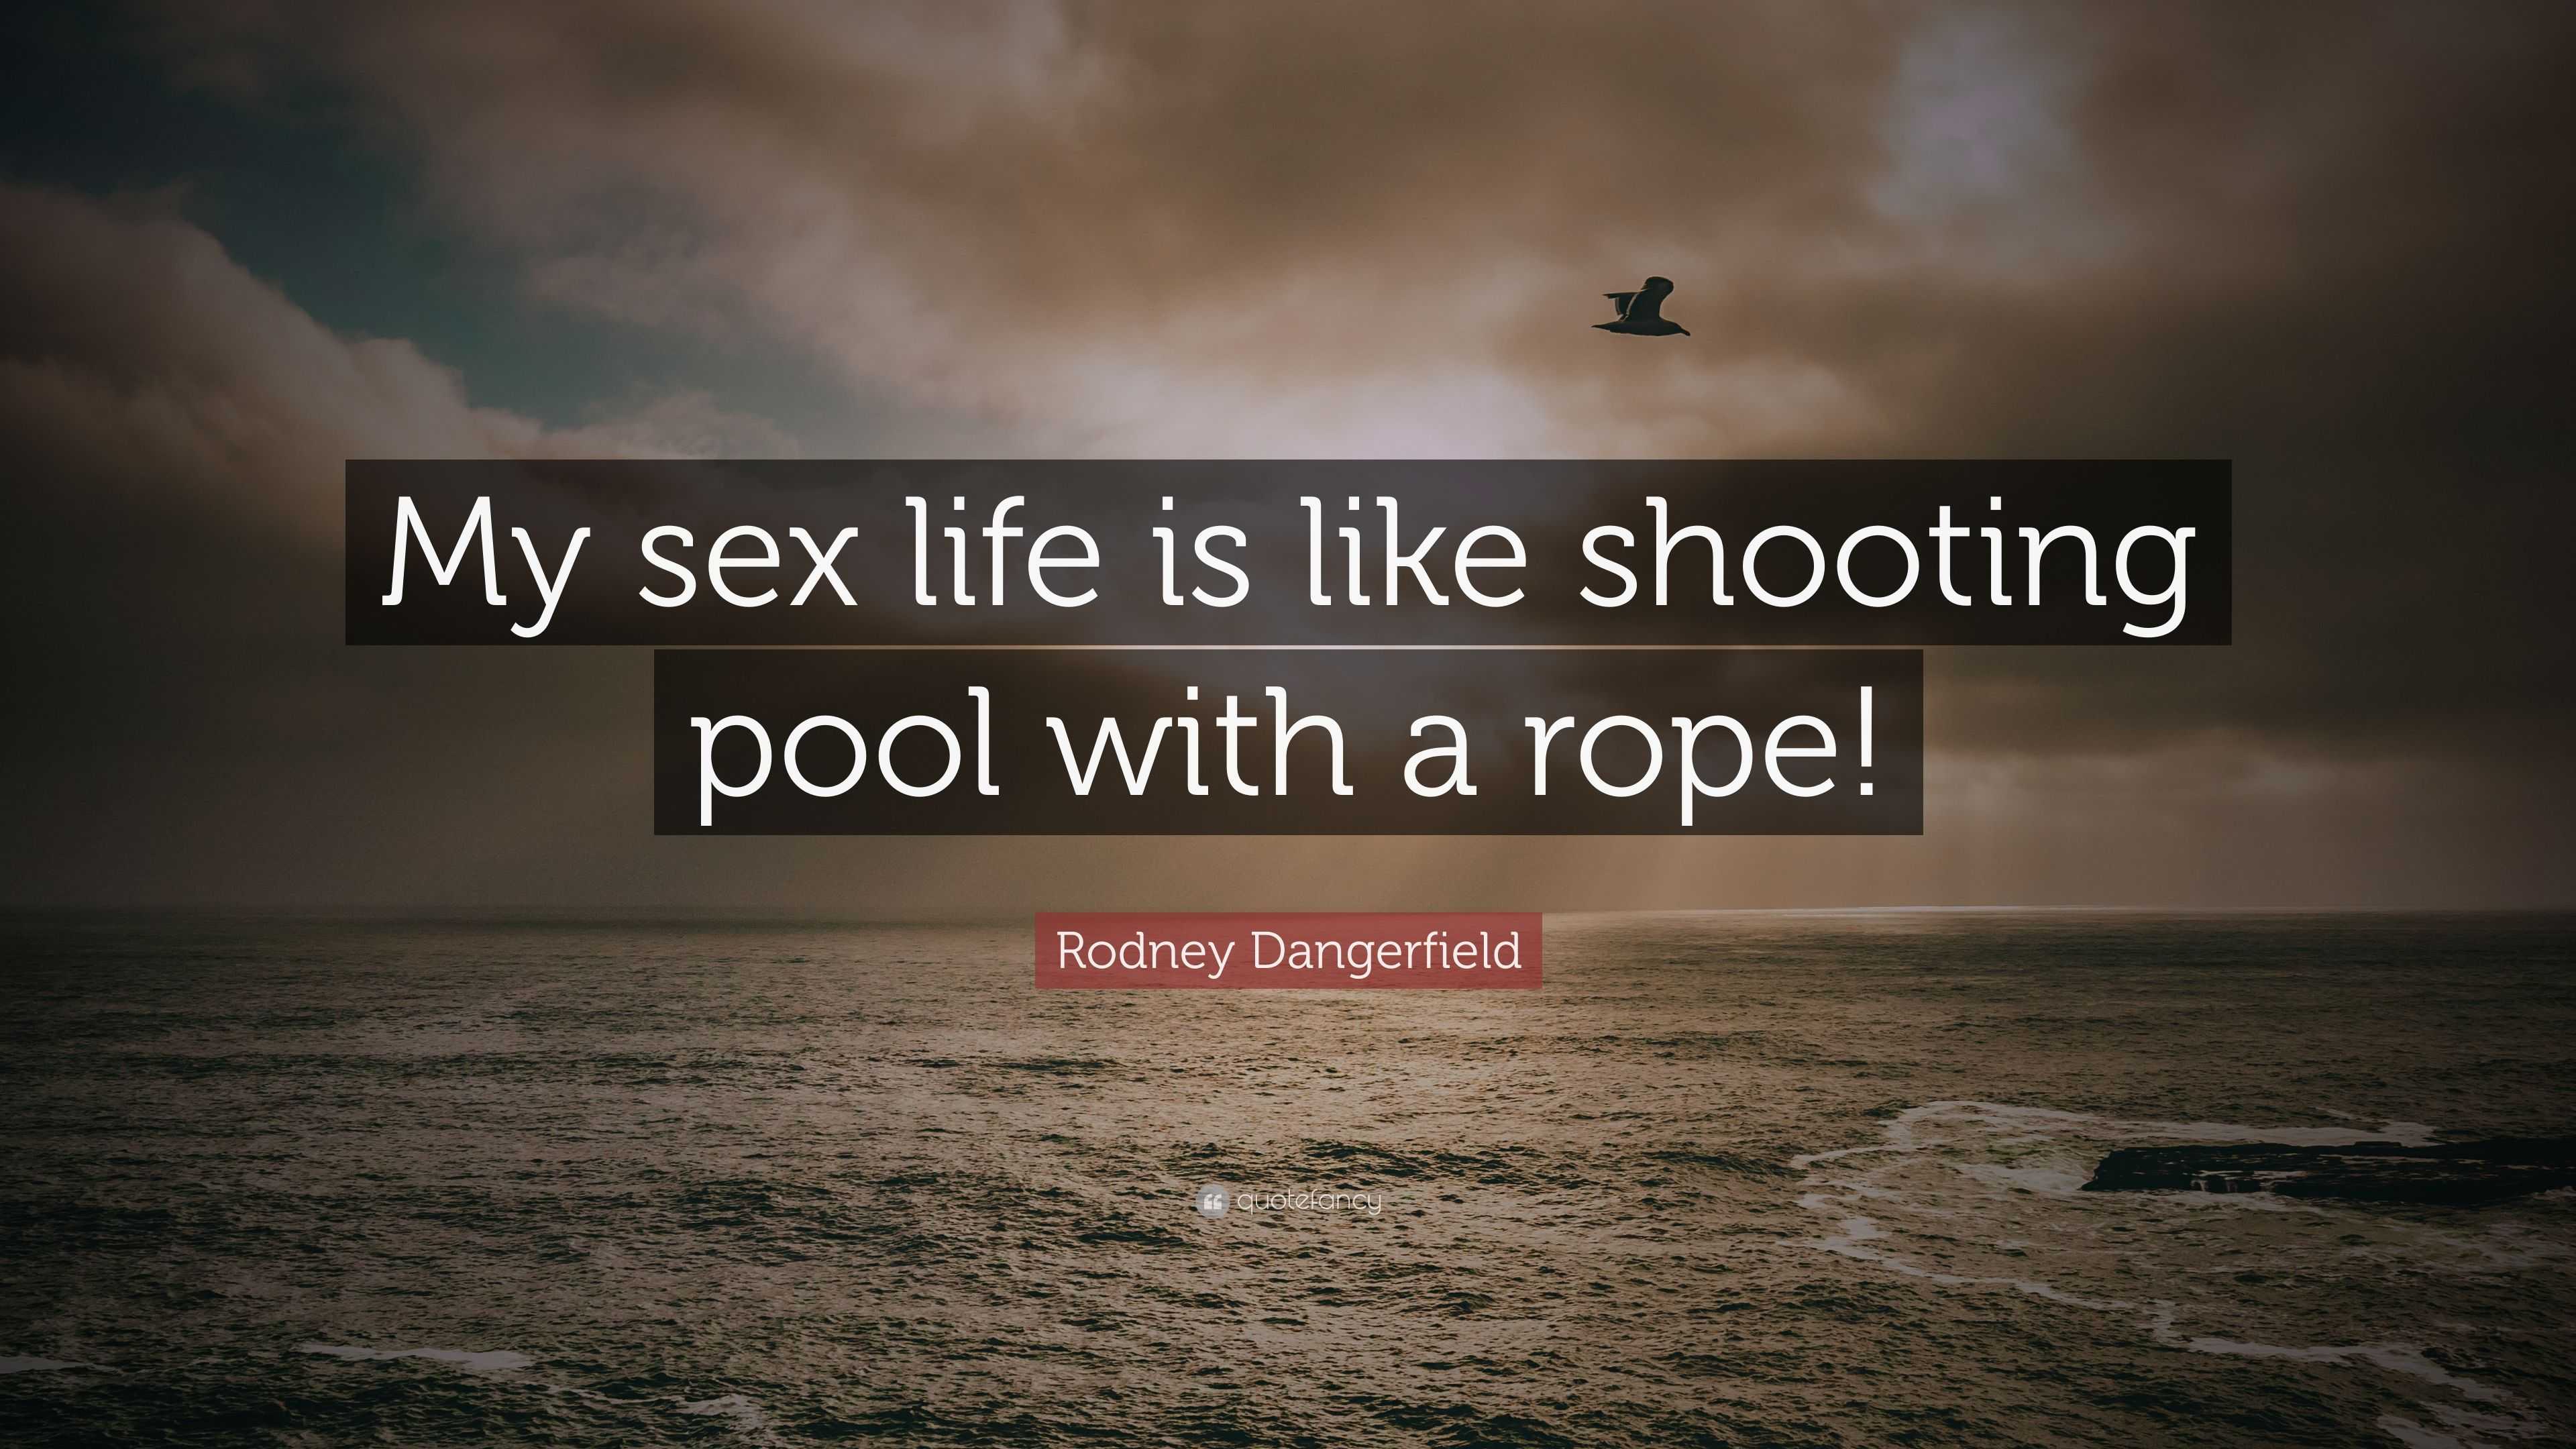 Rodney Dangerfield Quote “my Sex Life Is Like Shooting Pool With A Rope” 4798